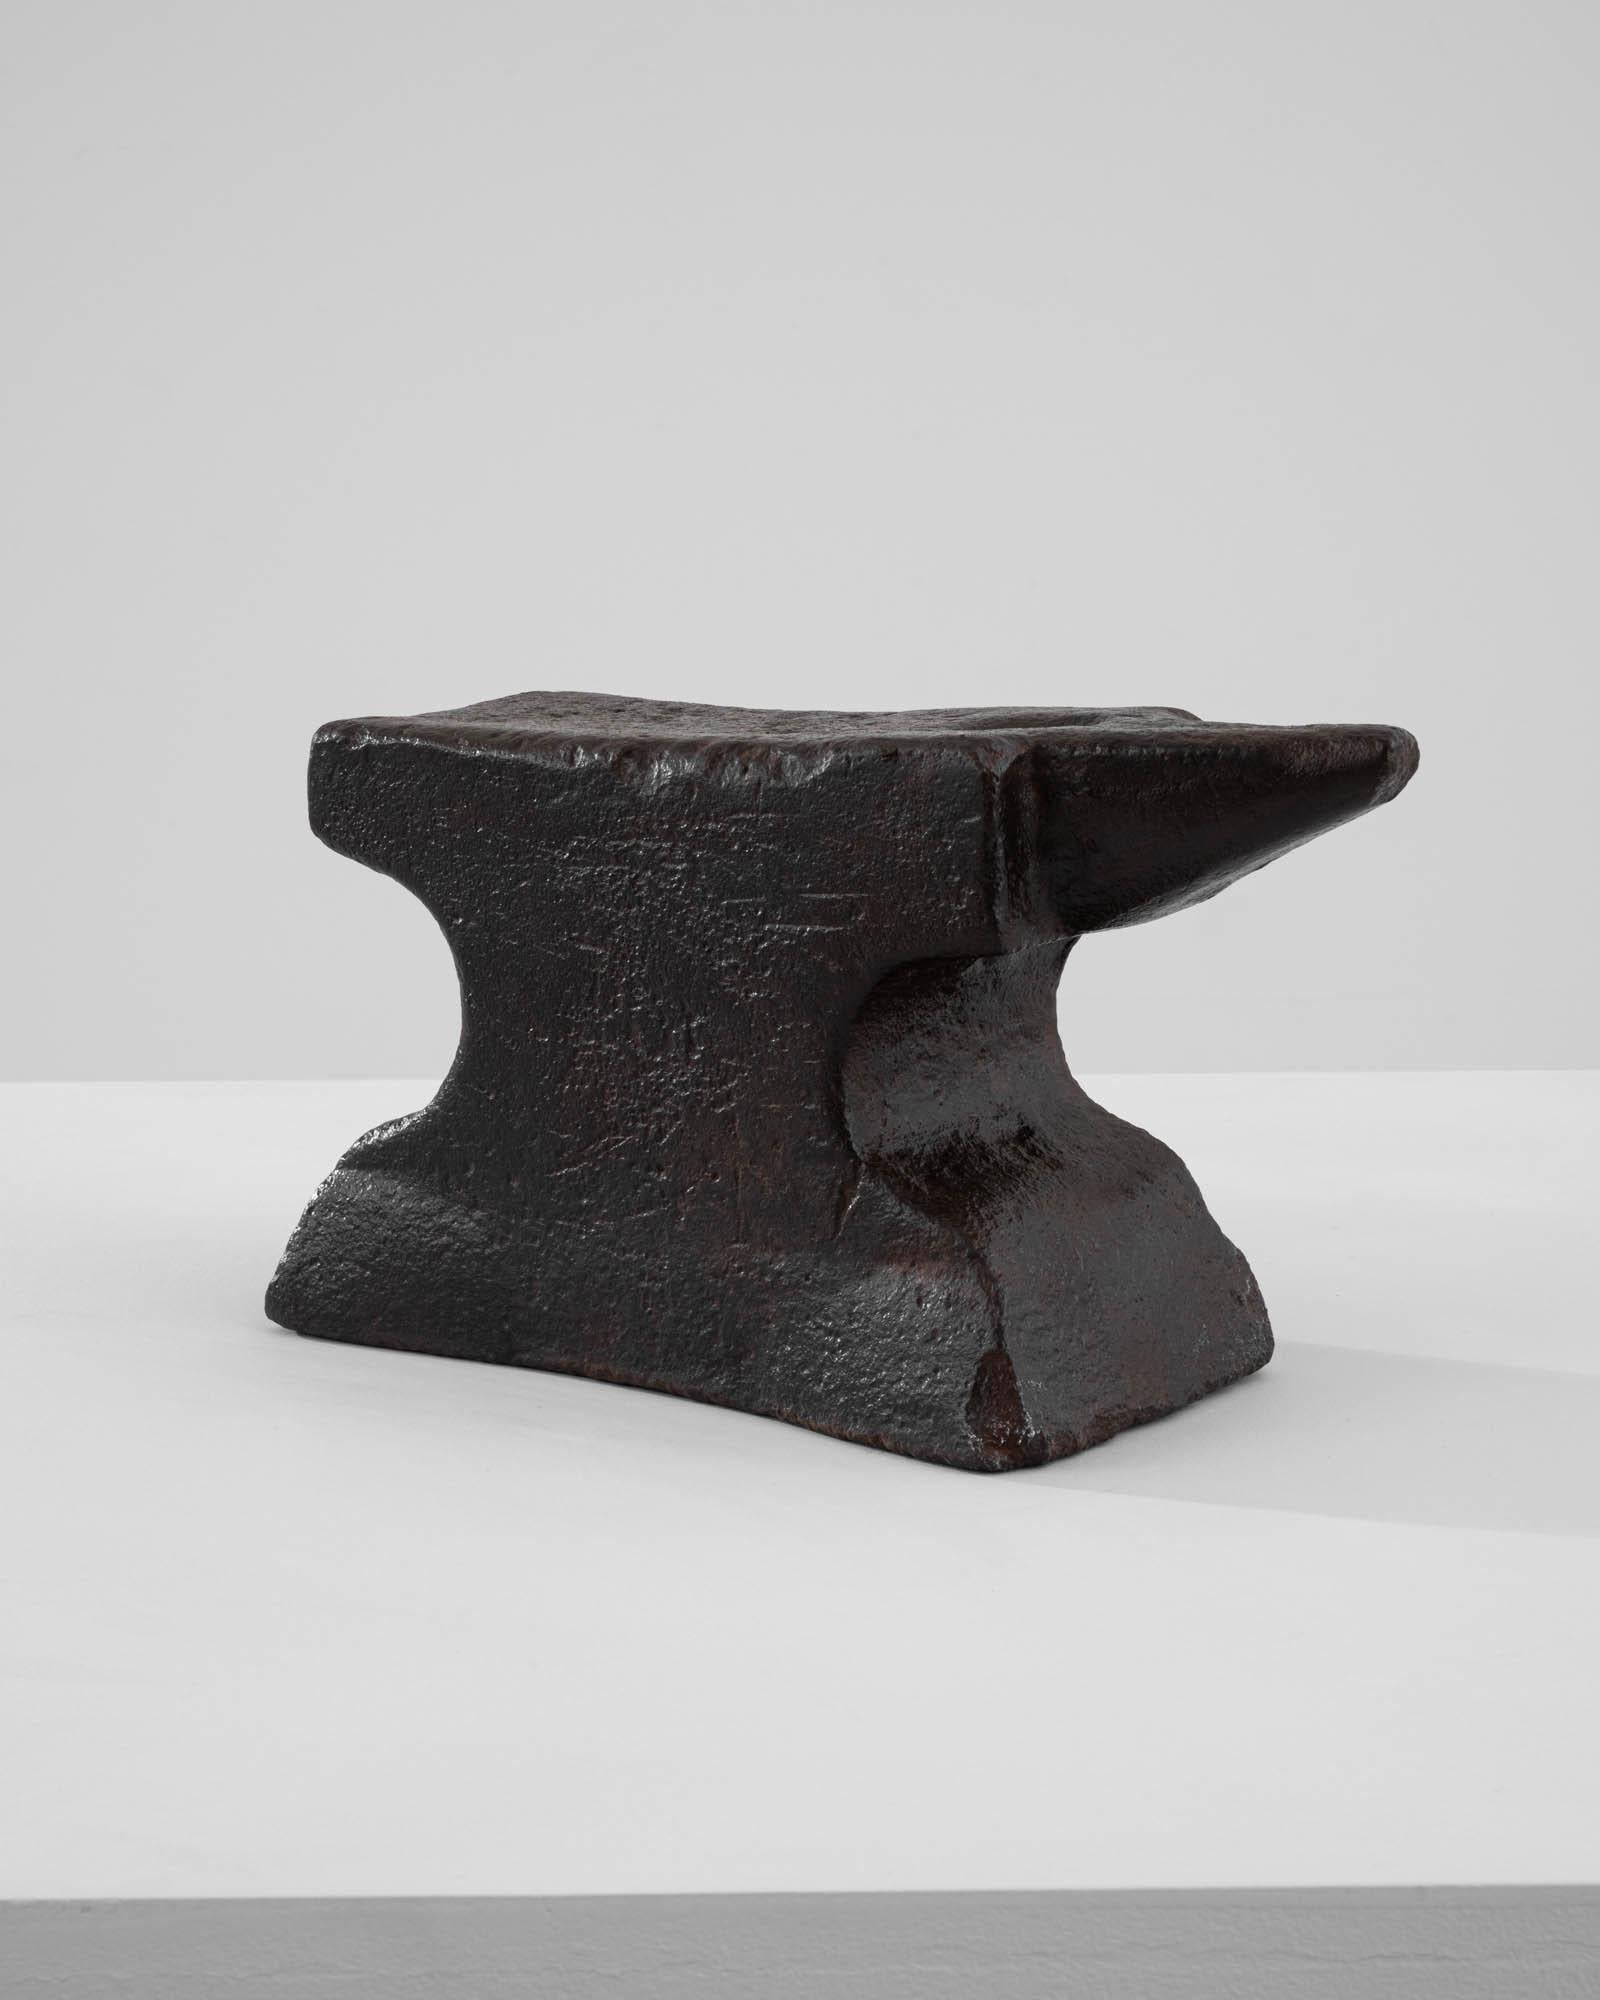 A metal anvil created in 1900s France. Weighty, battered, and time-worn, this solid chunk of history and craftsmanship radiates a palpable sense of a simpler, more hand-made time. Through the years, a delicate patina has spread across the surface of